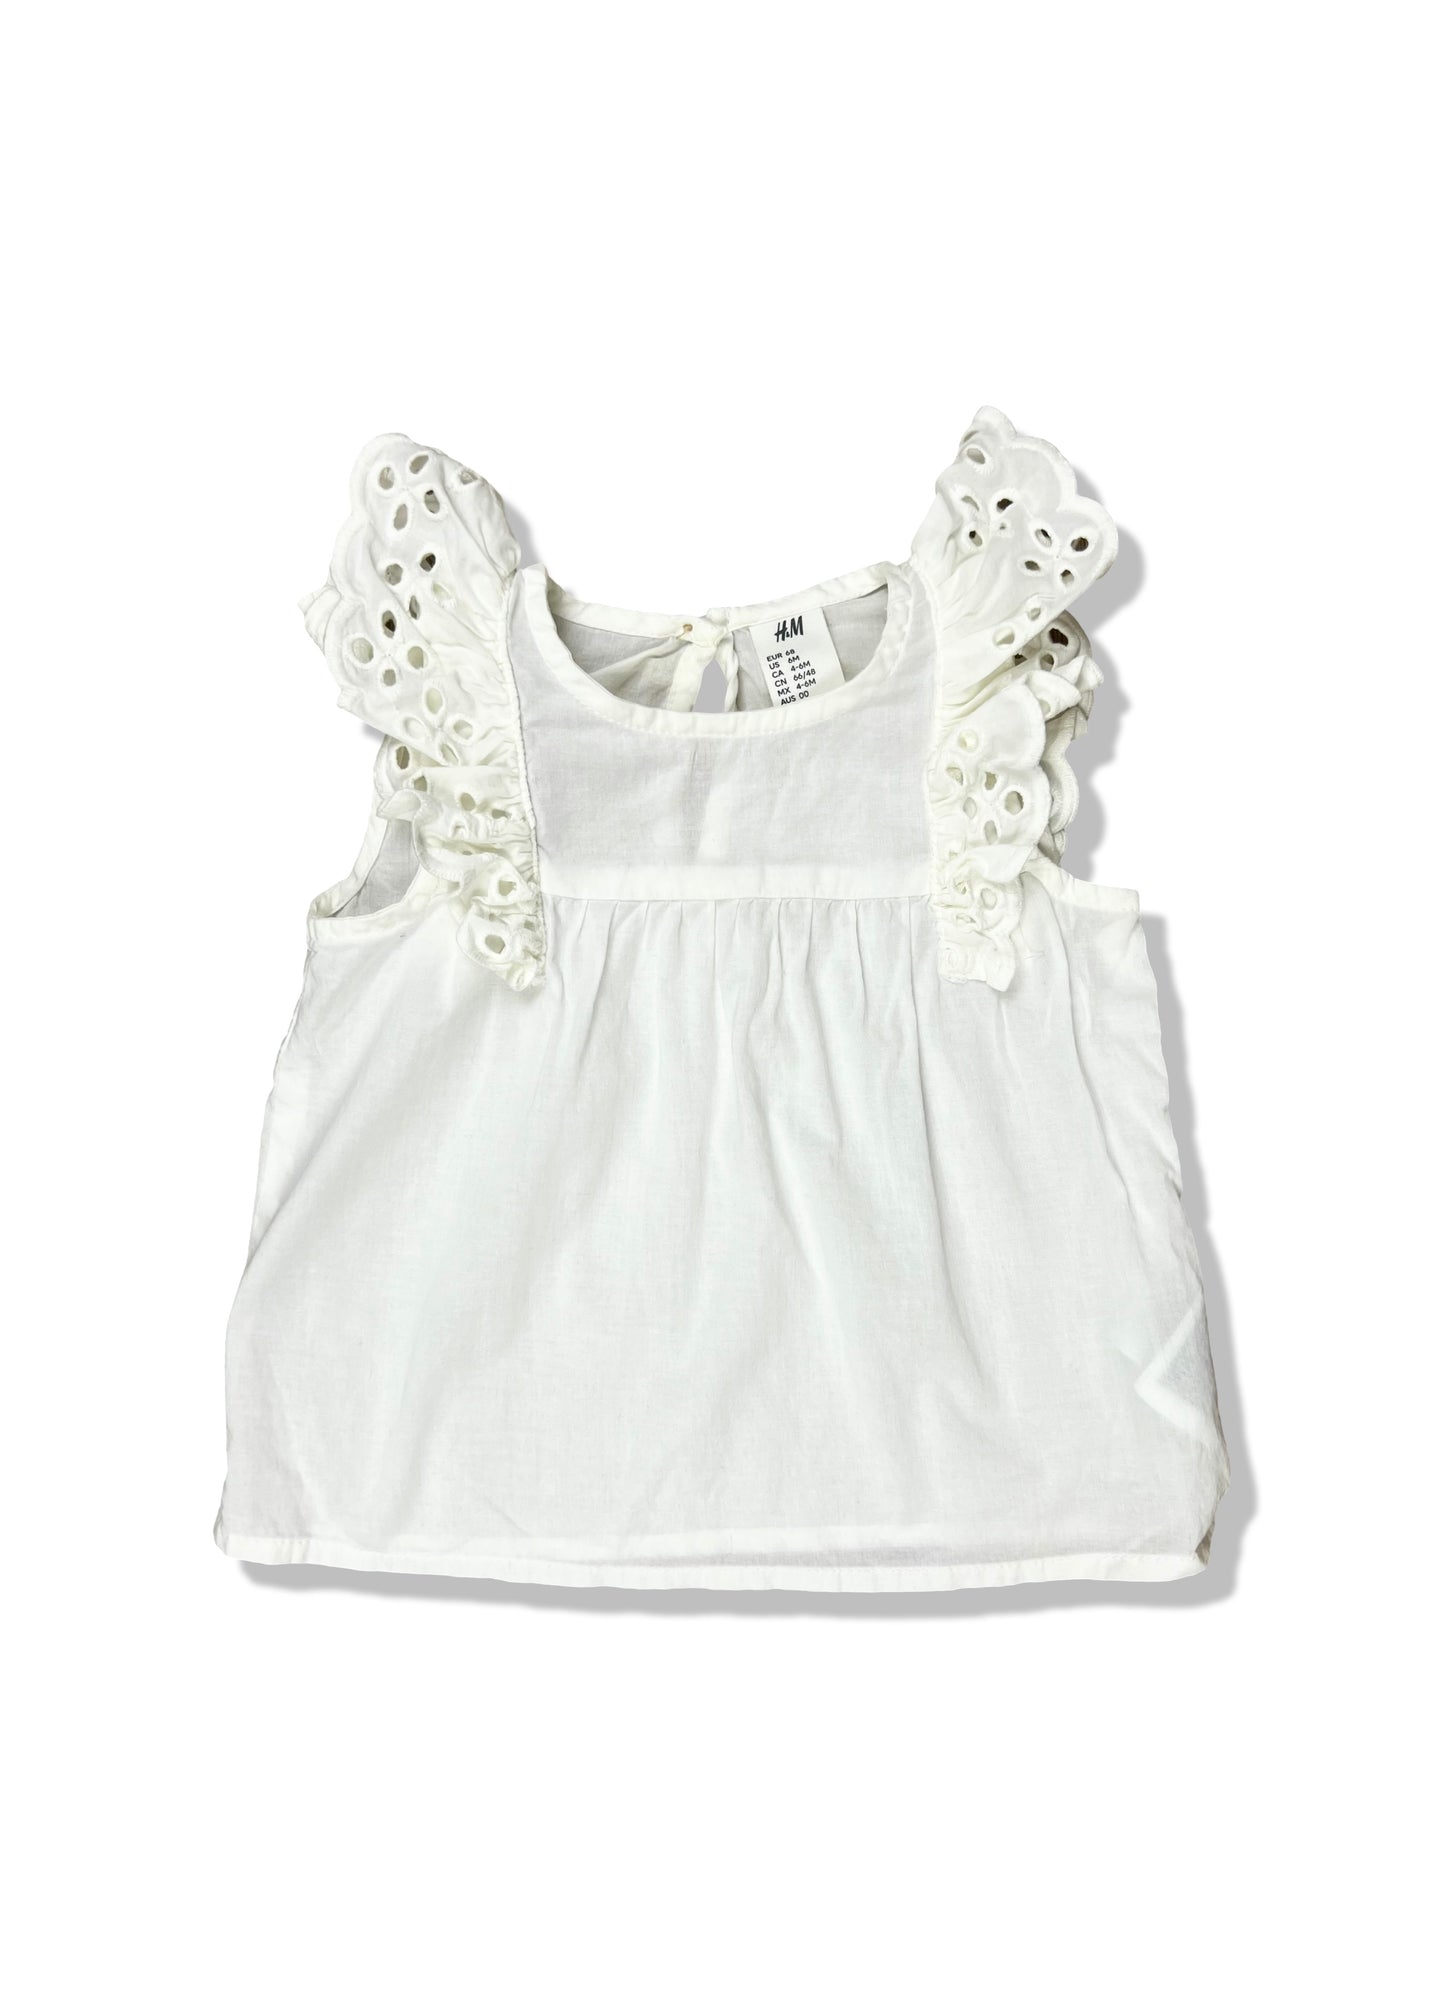 H&M Off White Flutter Top - Size 00